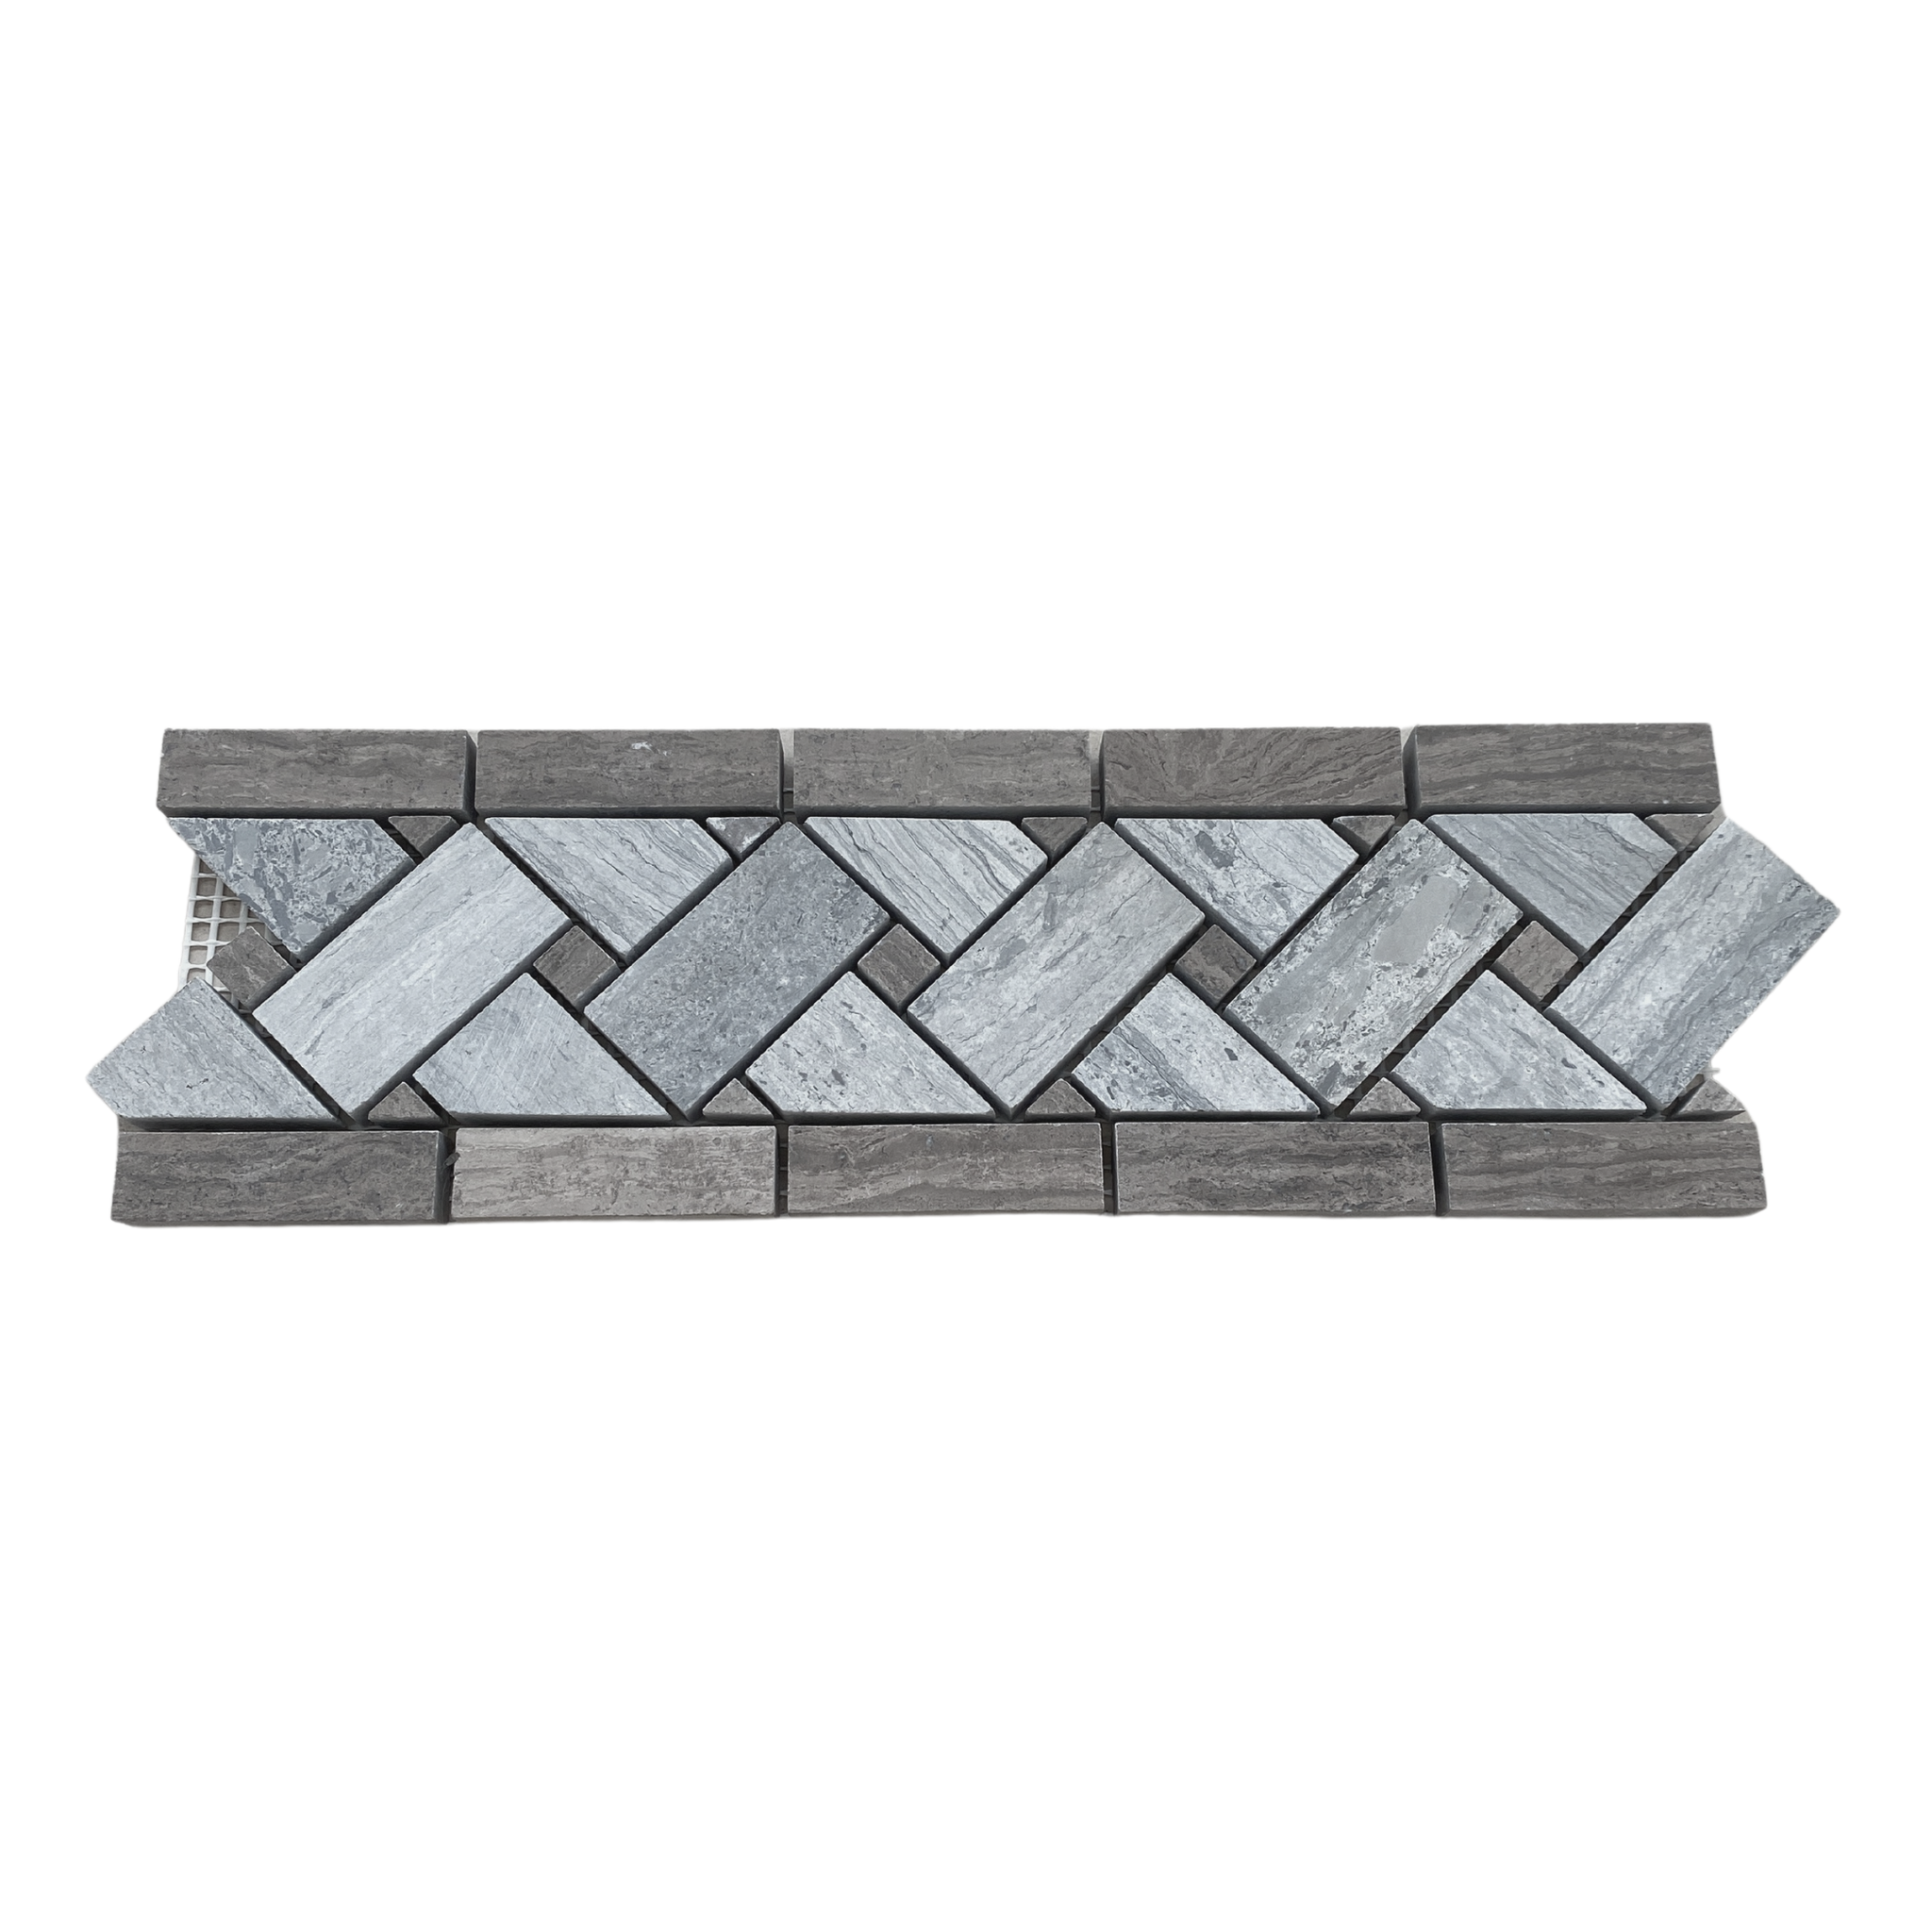 Milano Taupe Gray Marble Basketweave Border for Wall or Floor Application| Marble Border Tile| Brown Marble Mosaic Border| Decorative Marble Border| Bathroom Border Tile| Kitchen Border Tile All Marble Tiles